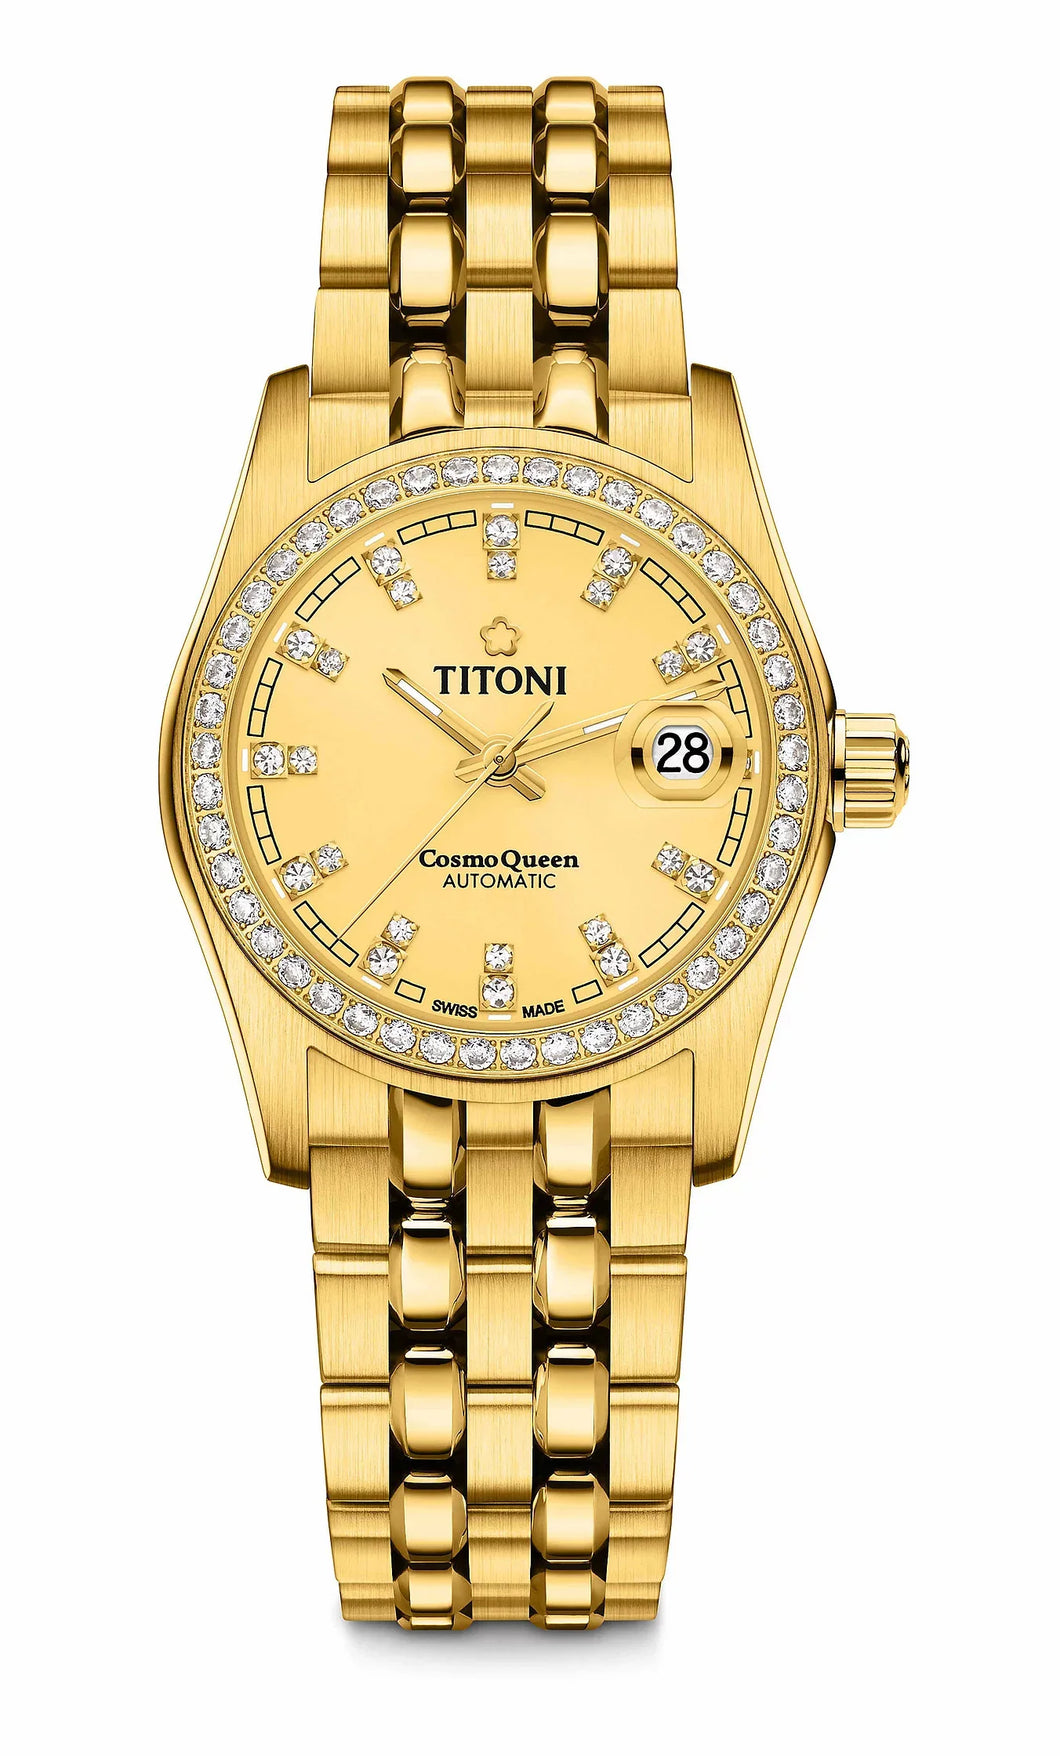 TITONI Cosmo Queen Automatic Ladies Watch 729 G-DB-306